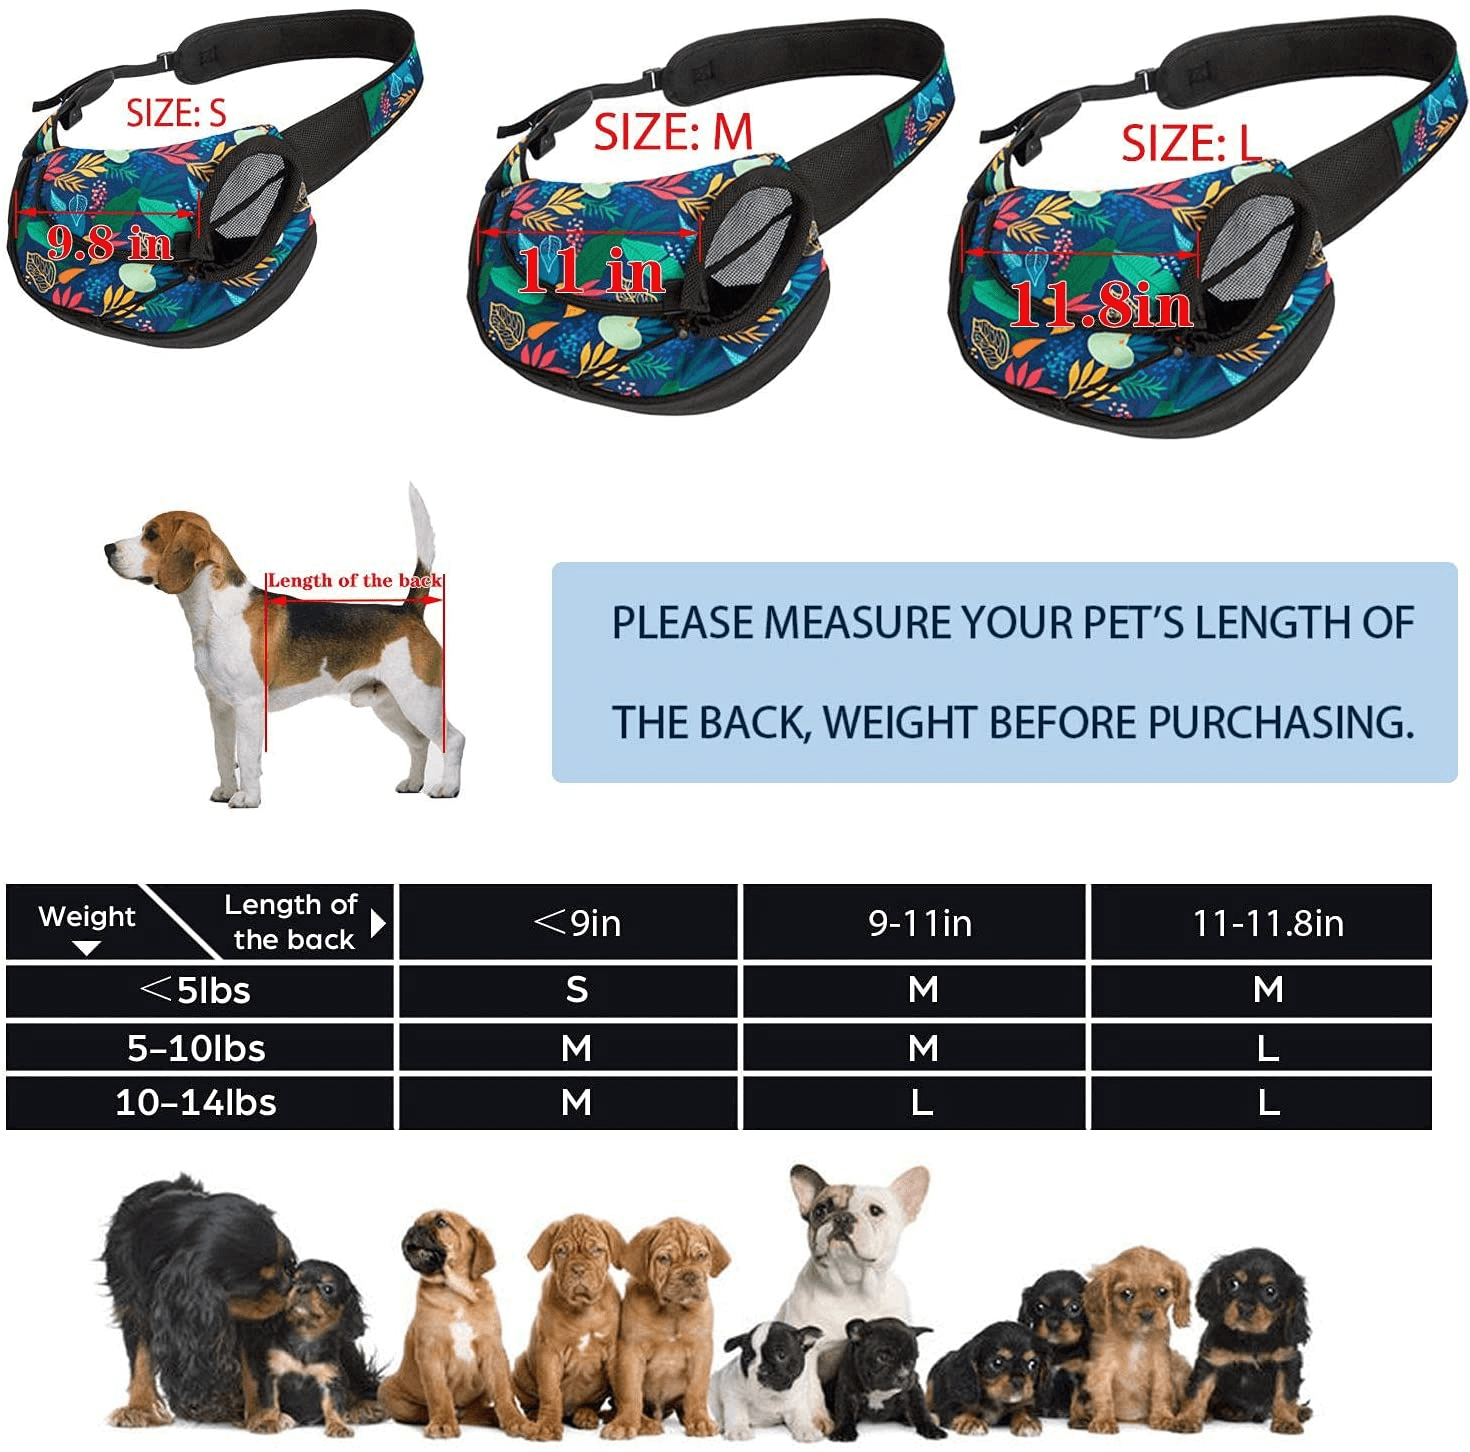 Small Dog Sling Carrier| Breathable Mesh Bag, Hands Free, Adjustable Dog Satchel for Small Dogs